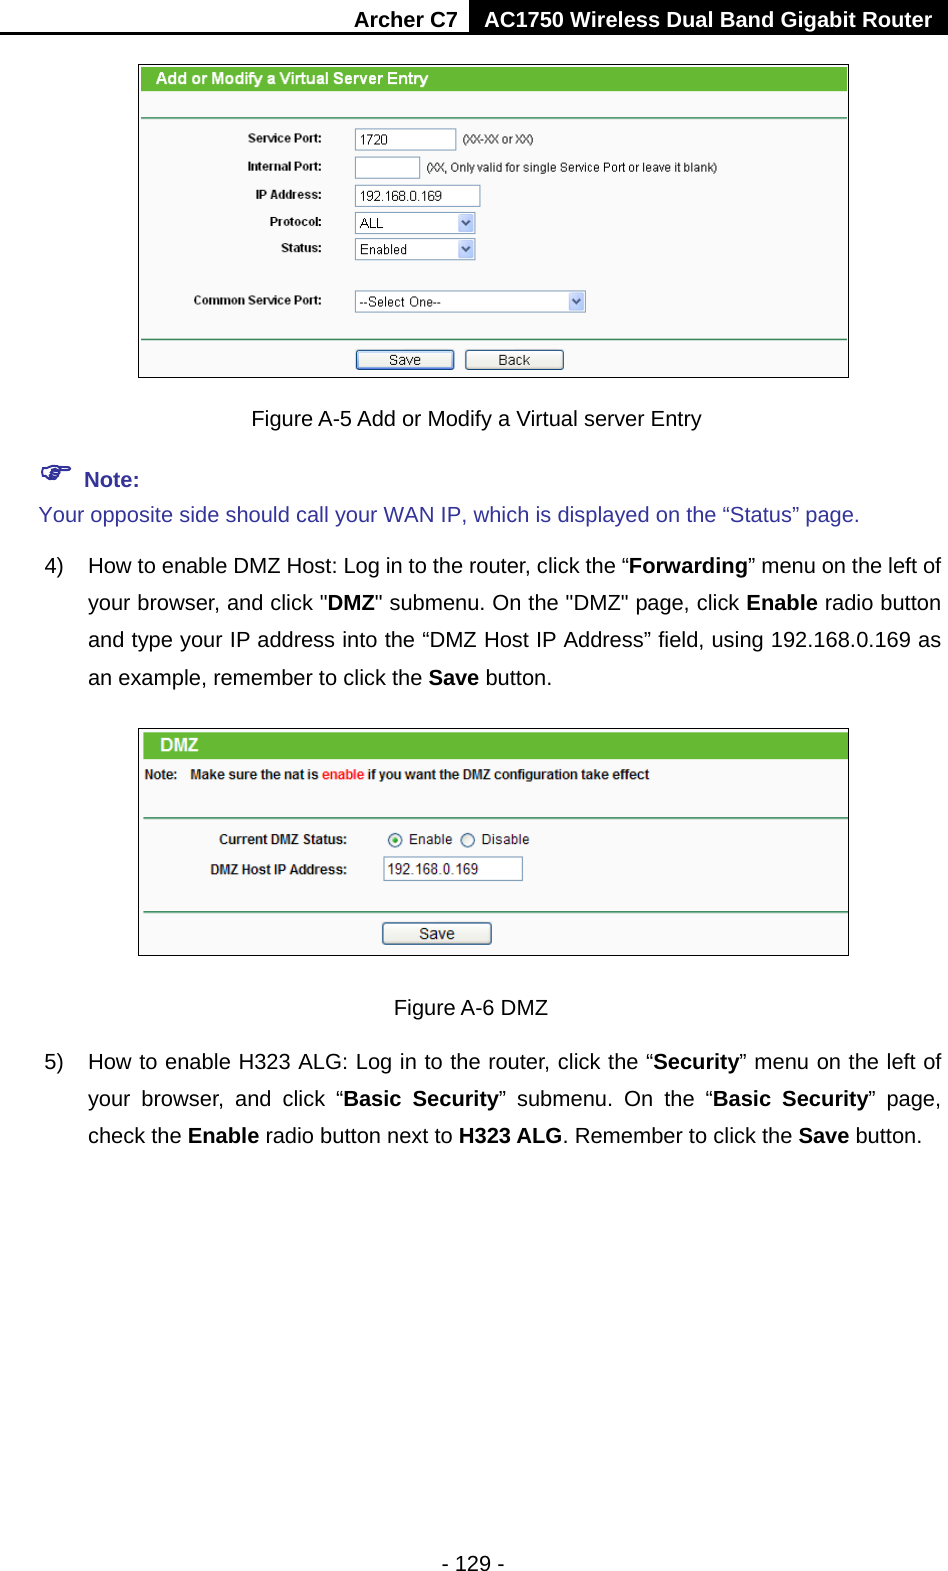 Archer C7 AC1750 Wireless Dual Band Gigabit Router  - 129 -   Figure A-5 Add or Modify a Virtual server Entry  Note: Your opposite side should call your WAN IP, which is displayed on the “Status” page. 4) How to enable DMZ Host: Log in to the router, click the “Forwarding” menu on the left of your browser, and click &quot;DMZ&quot; submenu. On the &quot;DMZ&quot; page, click Enable radio button and type your IP address into the “DMZ Host IP Address” field, using 192.168.0.169 as an example, remember to click the Save button.    Figure A-6 DMZ 5) How to enable H323 ALG: Log in to the router, click the “Security” menu on the left of your browser, and click “Basic Security”  submenu.  On the “Basic Security”  page, check the Enable radio button next to H323 ALG. Remember to click the Save button. 